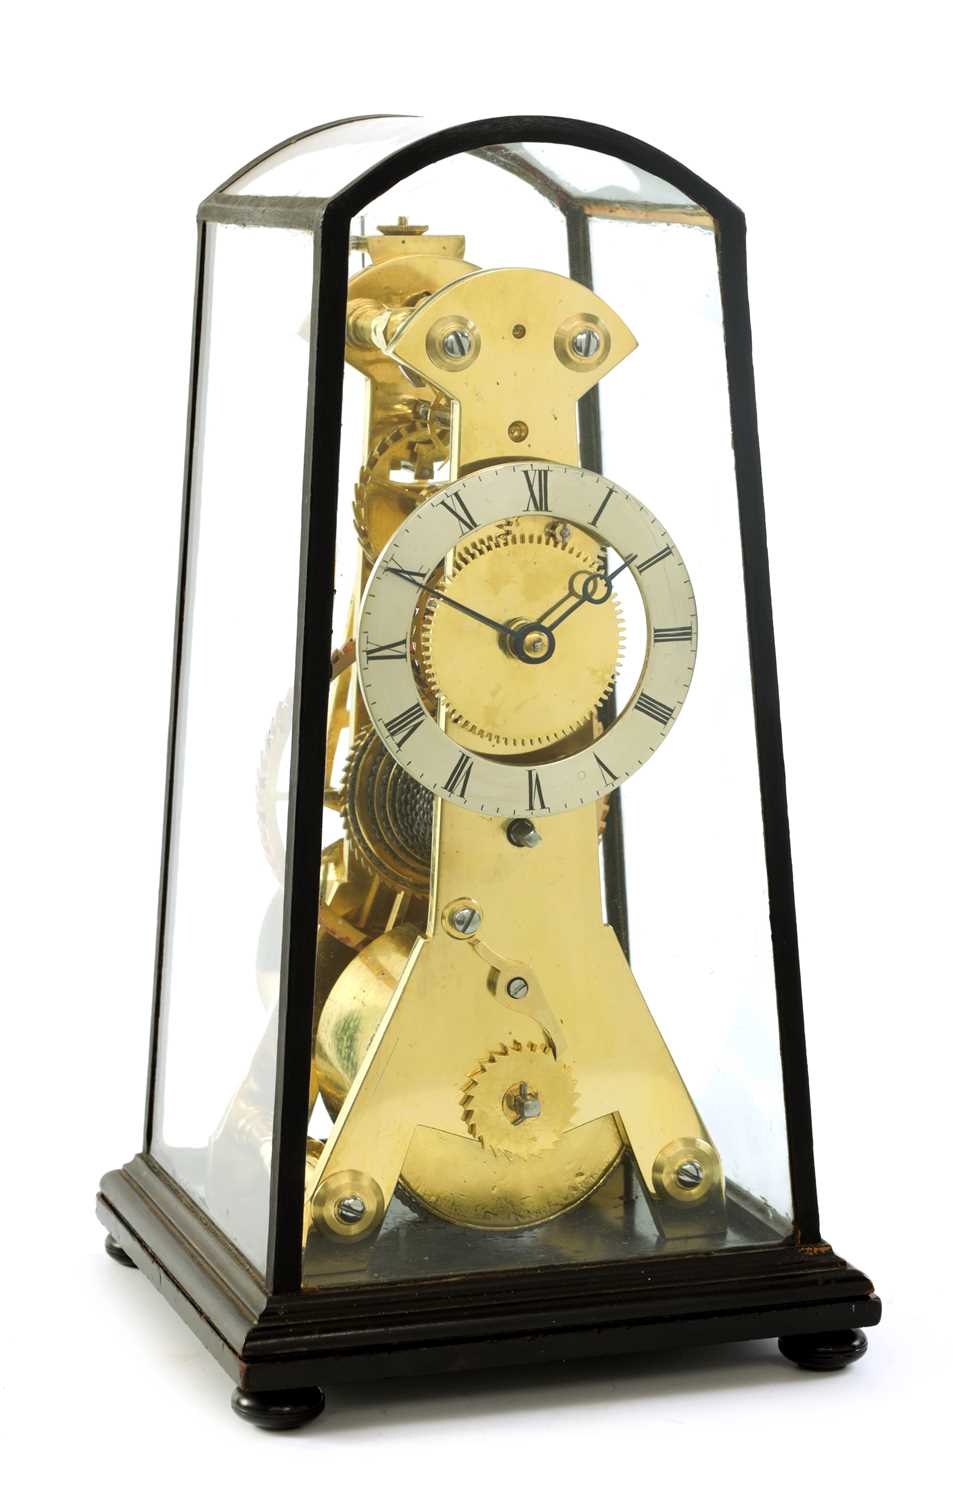 CHARLES MACDOWALL, WAKEFIELD. A RARE WILLIAM IV MONTH DURATION PATENT HELIX LEVER SKELETON CLOCK CIR